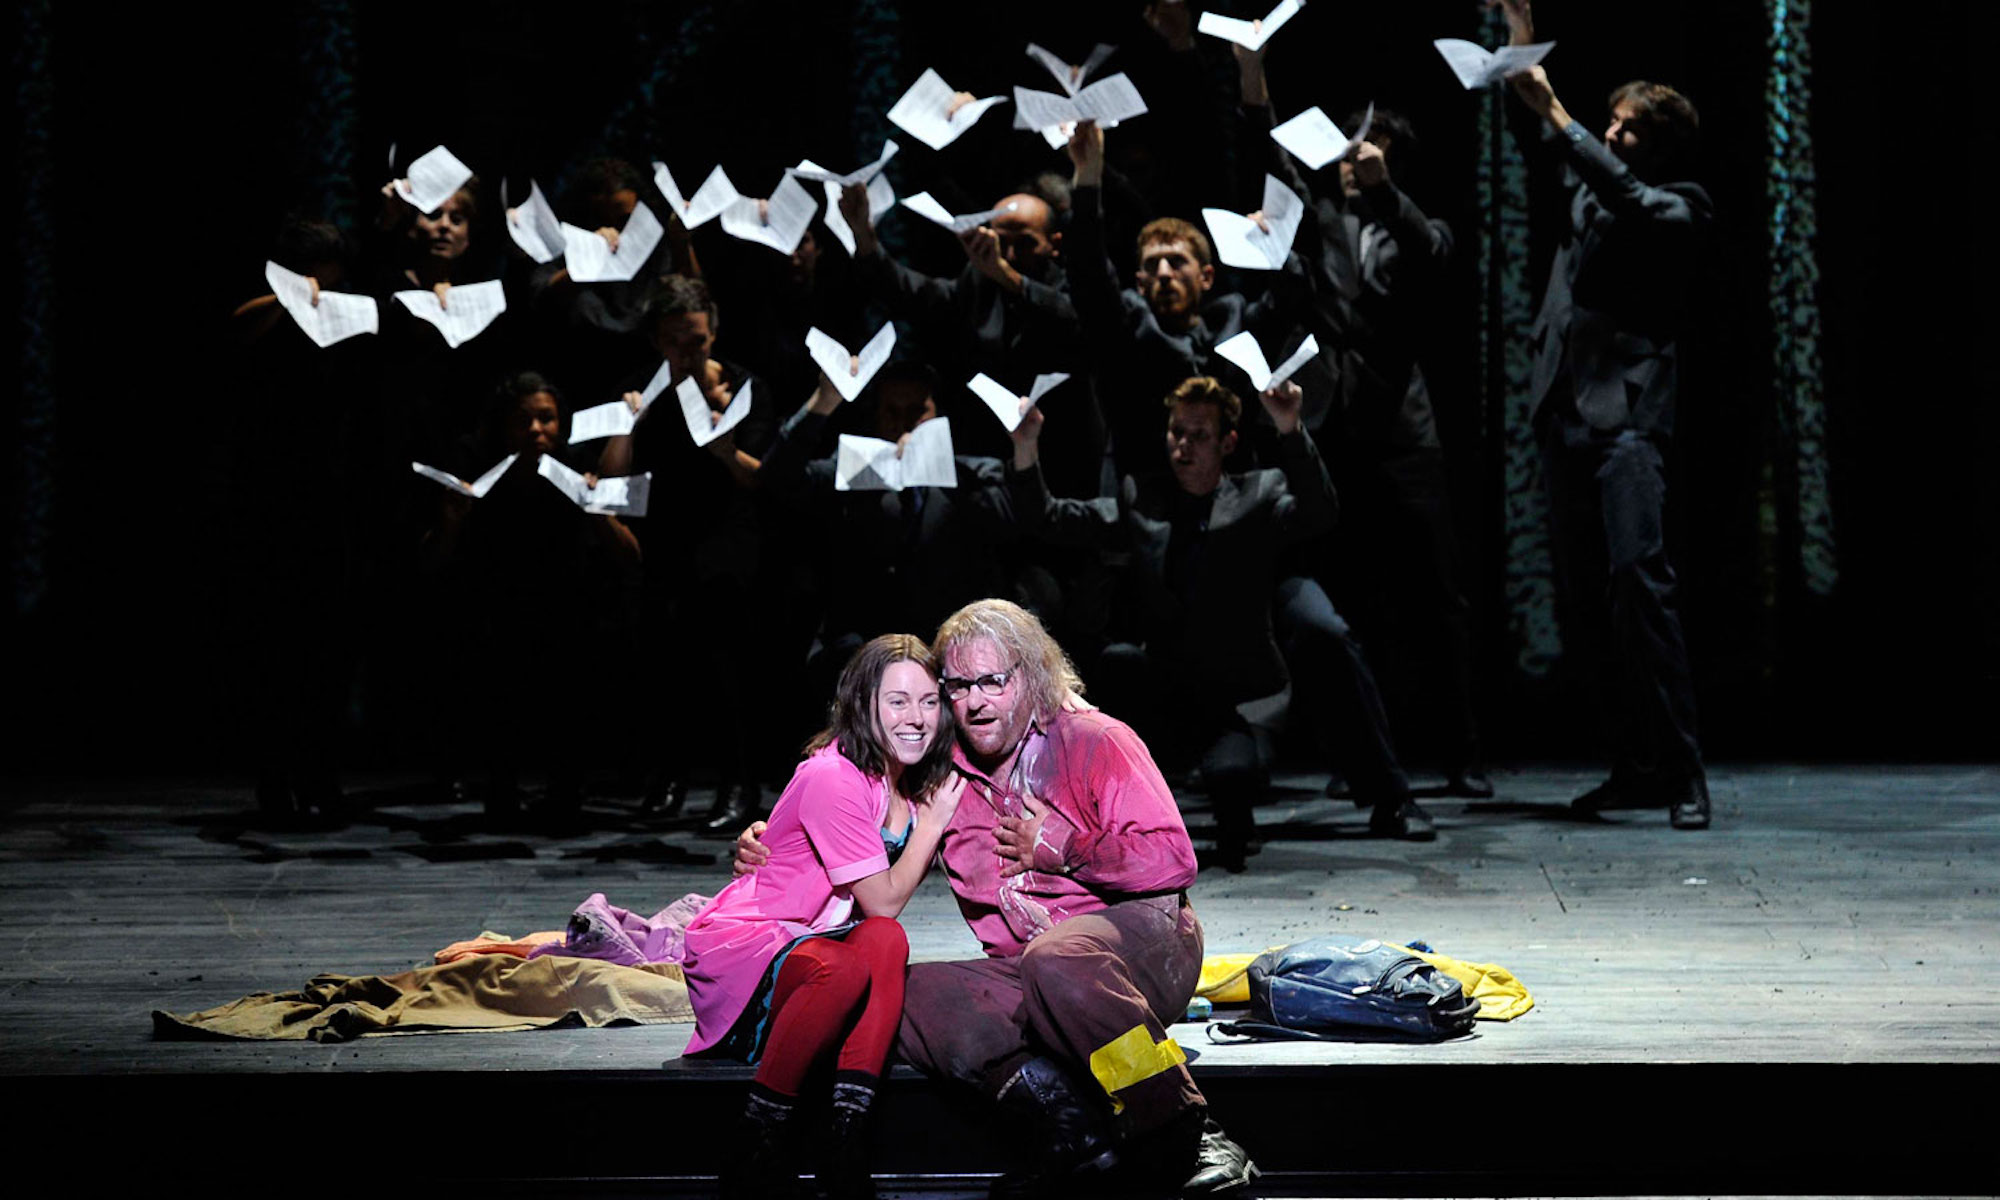 Two actors in pink cuddle together romantically, while behind them, the other actors use books to mimic a bird flying